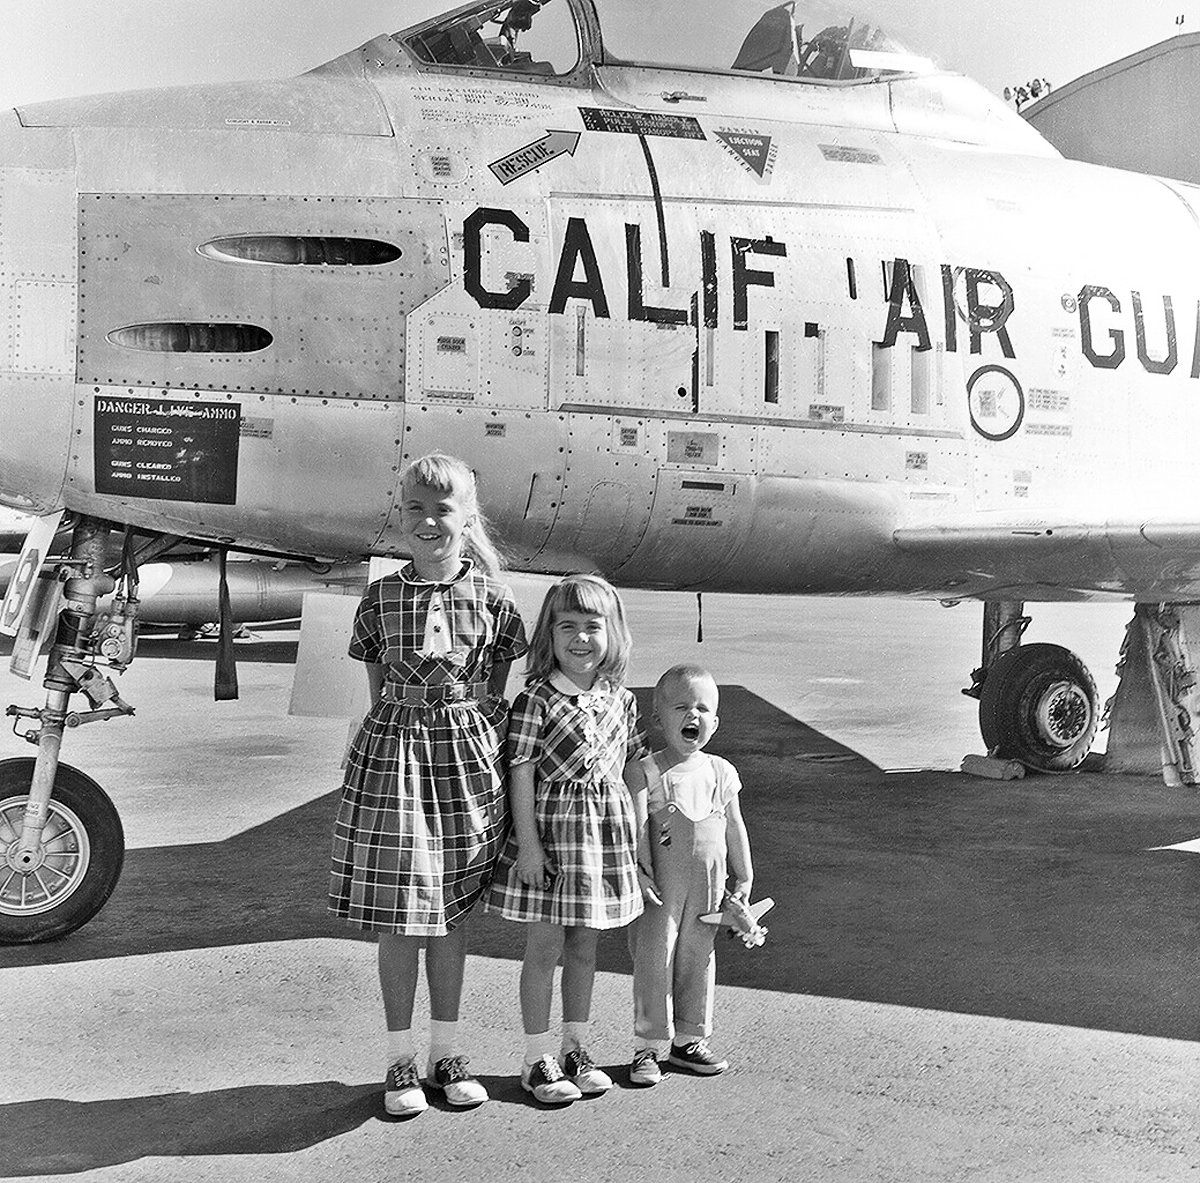 Lets_hear_it_for_the_195th__Fighter_Squadron__1958__the_Clarks